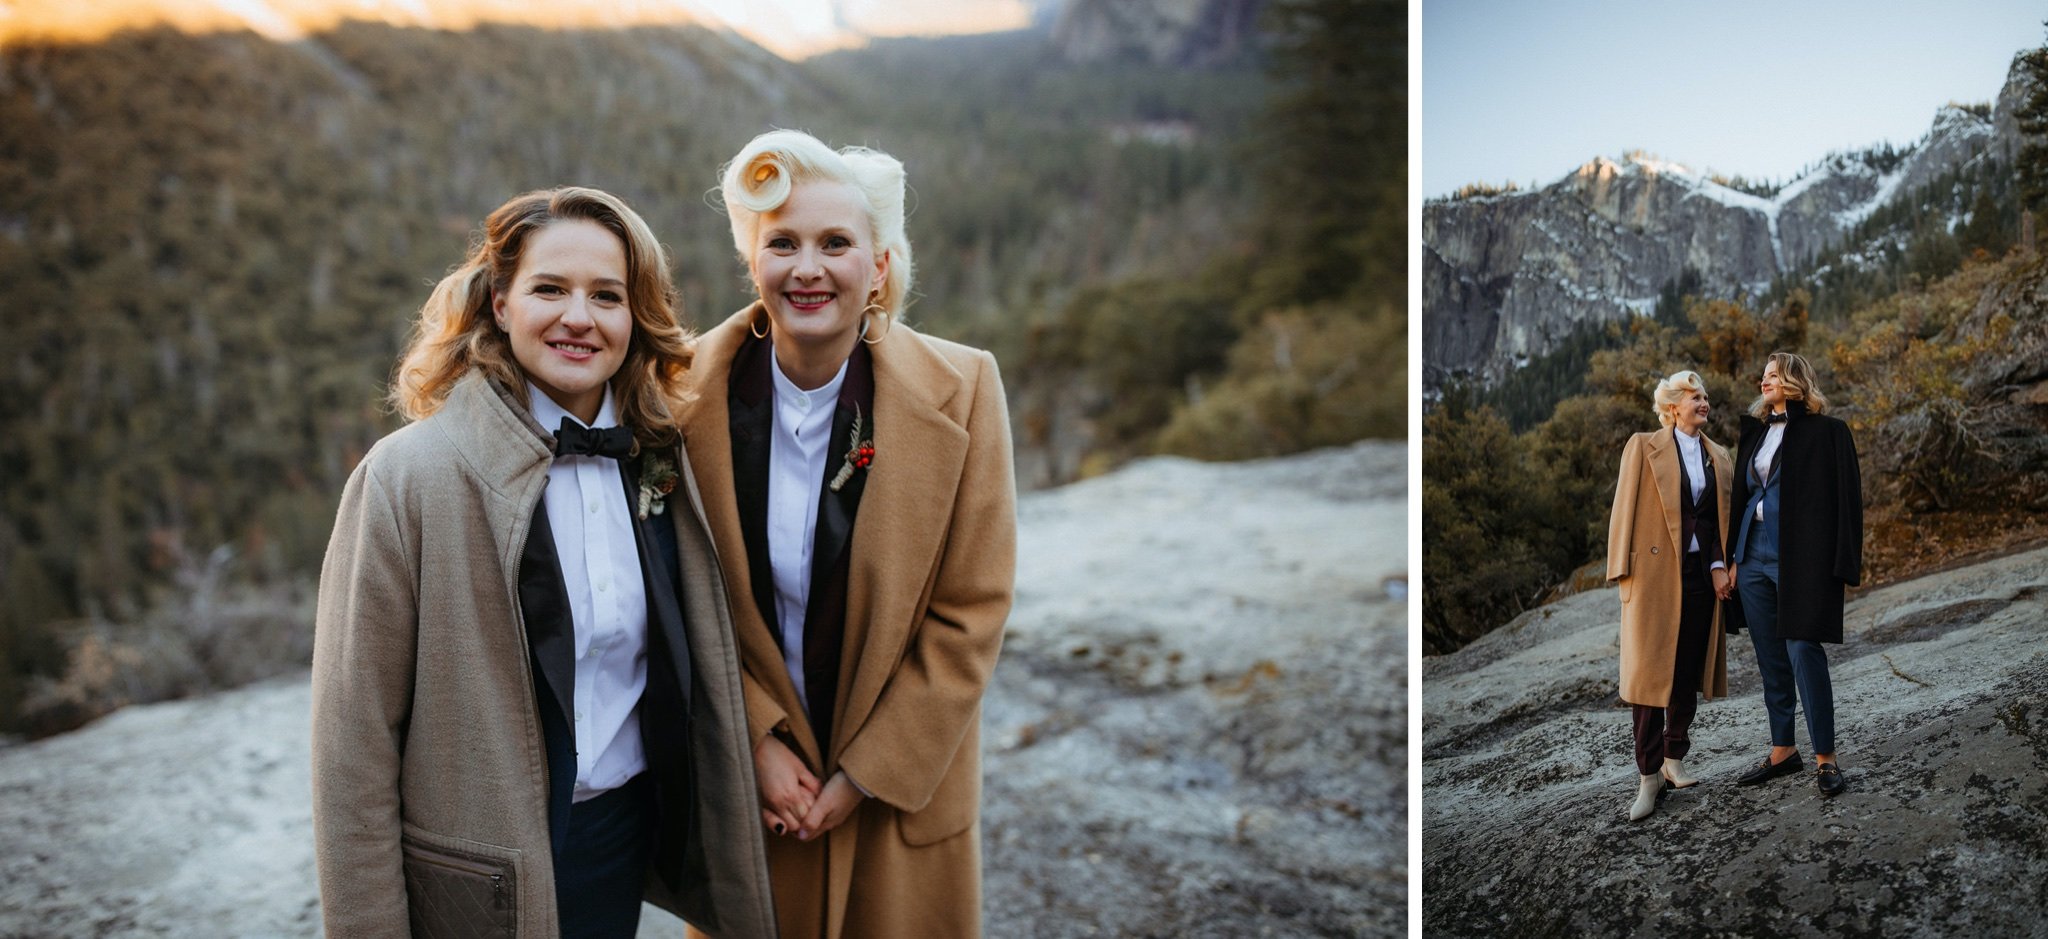 LGBT-Yosemite-National-Park-Elopement-with-Two-Brides-Will-Khoury-Elopement-Photographer_24.jpg